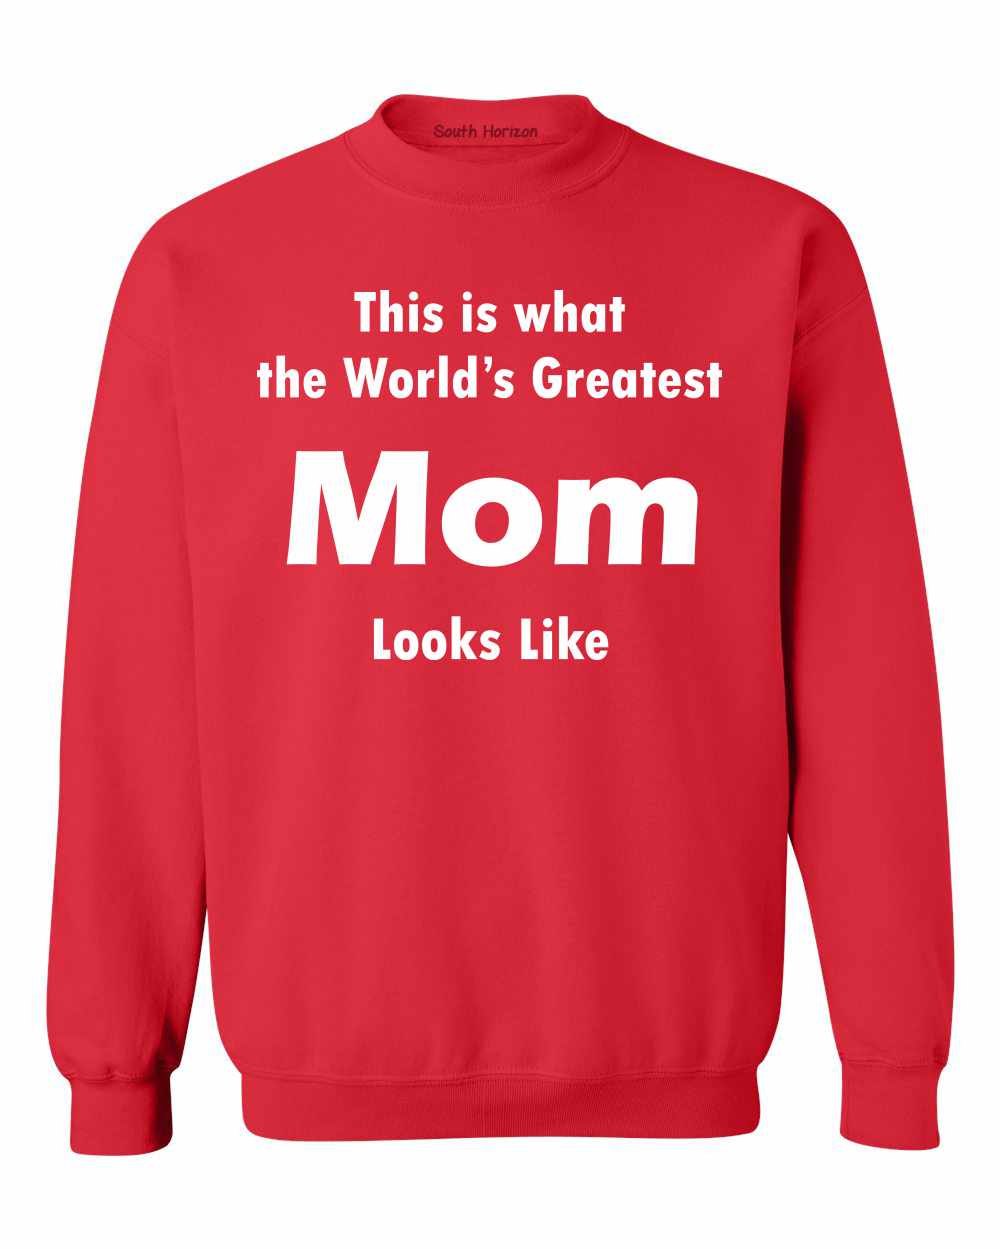 This is what the World's Greatest Mom Looks Like Sweat Shirt